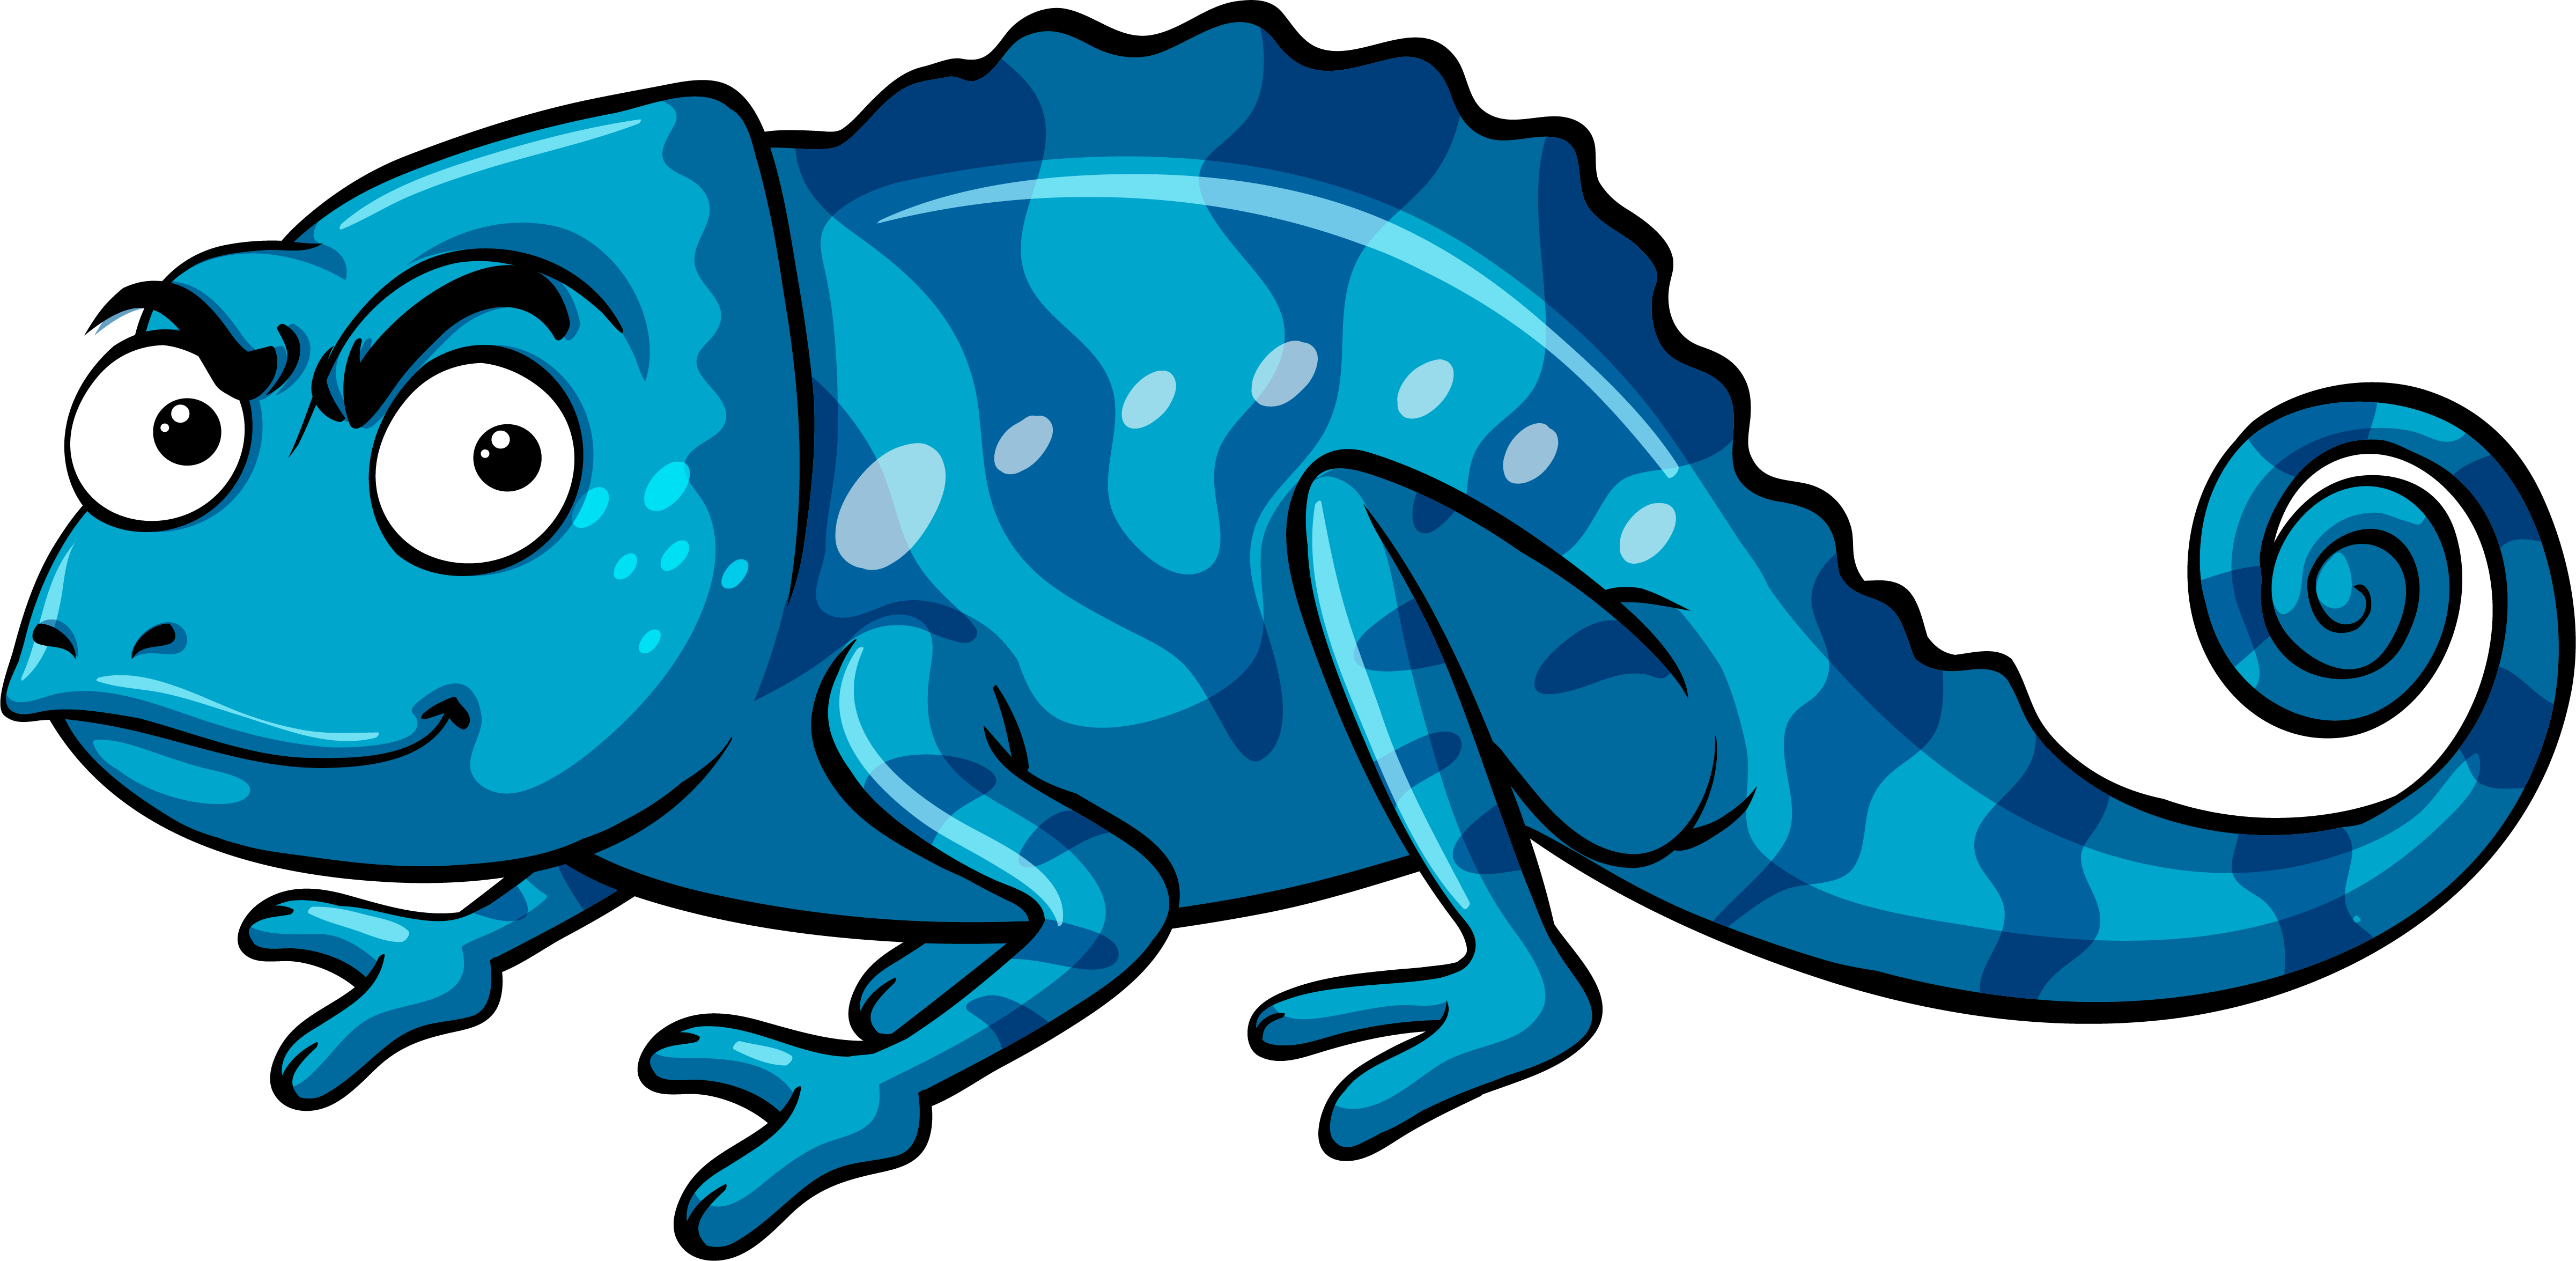 Lizard clipart blue lizard, Lizard blue lizard Transparent FREE for